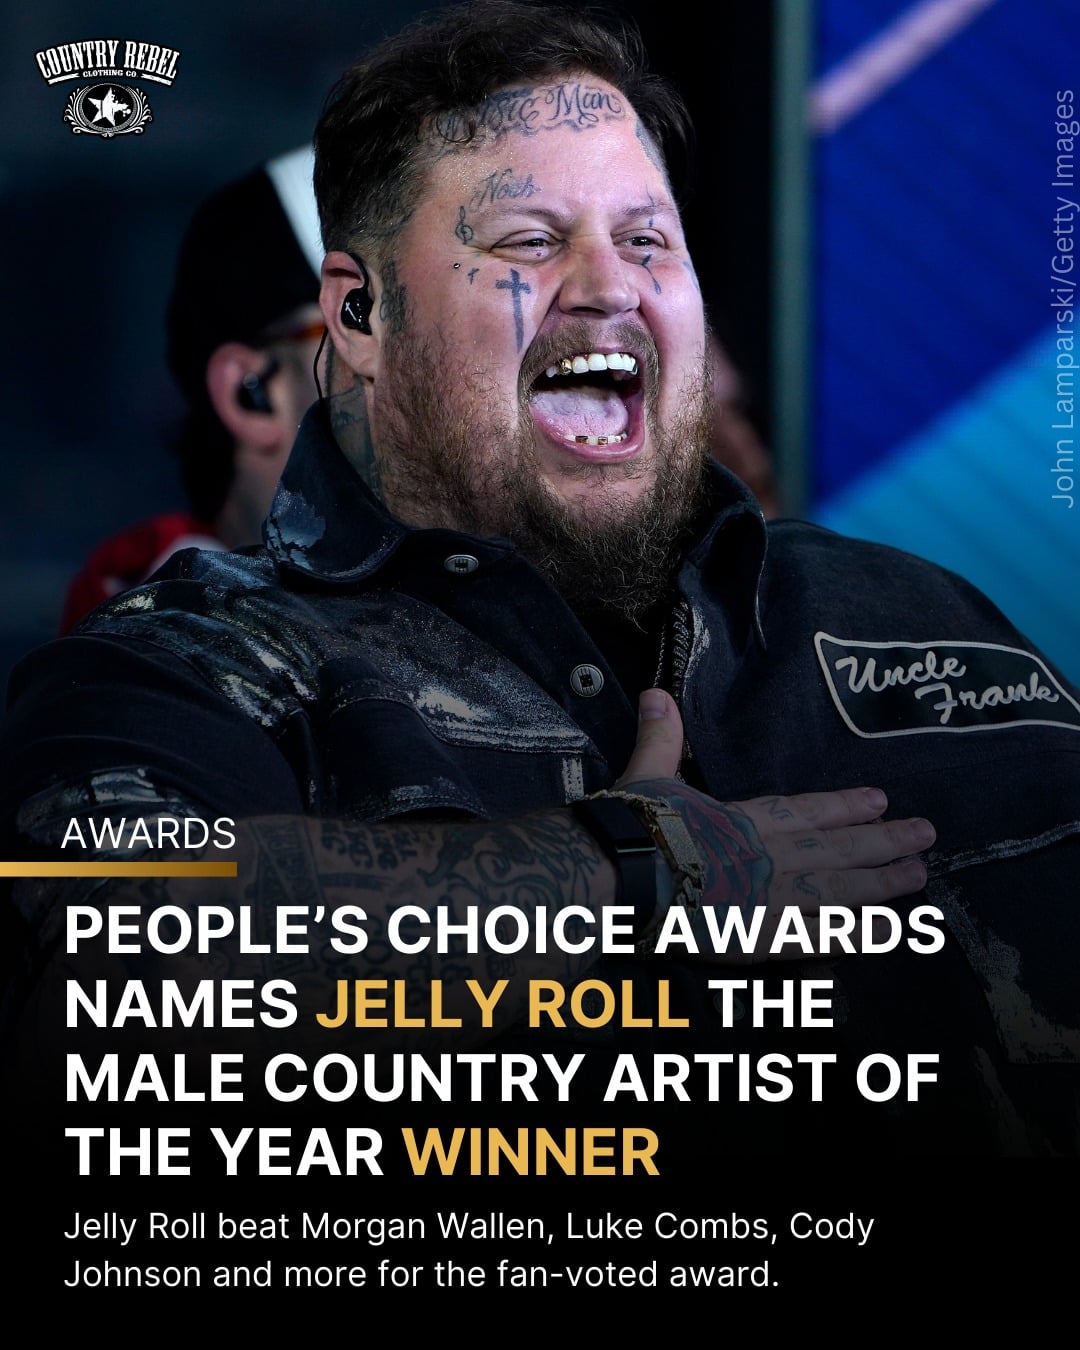 Jelly Roll won the People's Choice Award for Male Country Artist of the Year